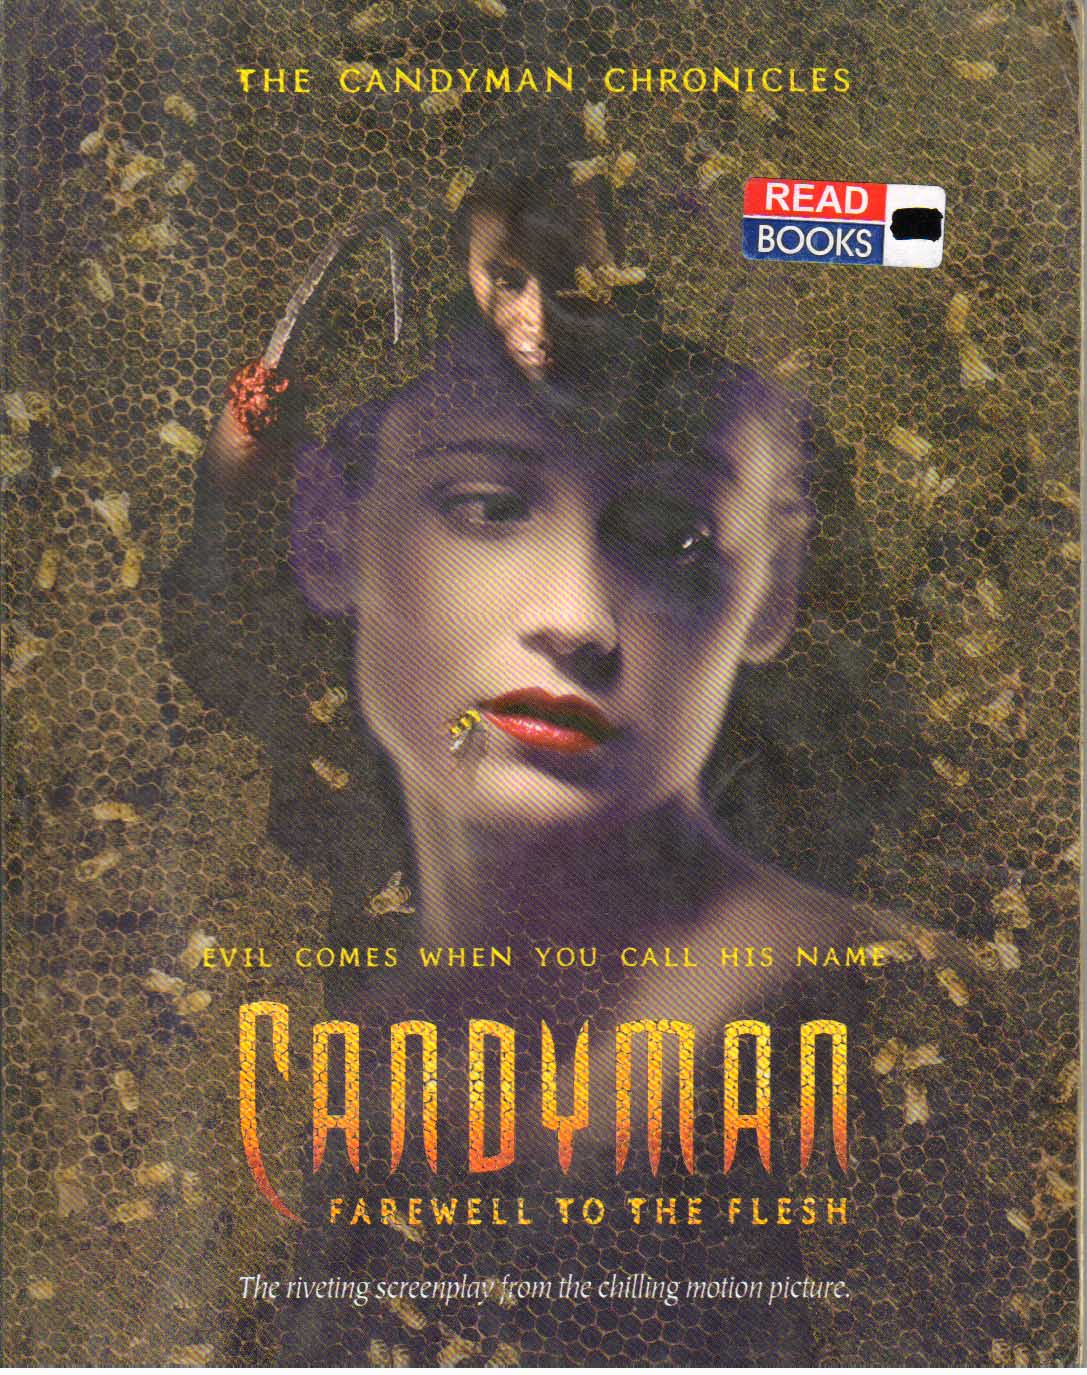 The Candyman Chronicles